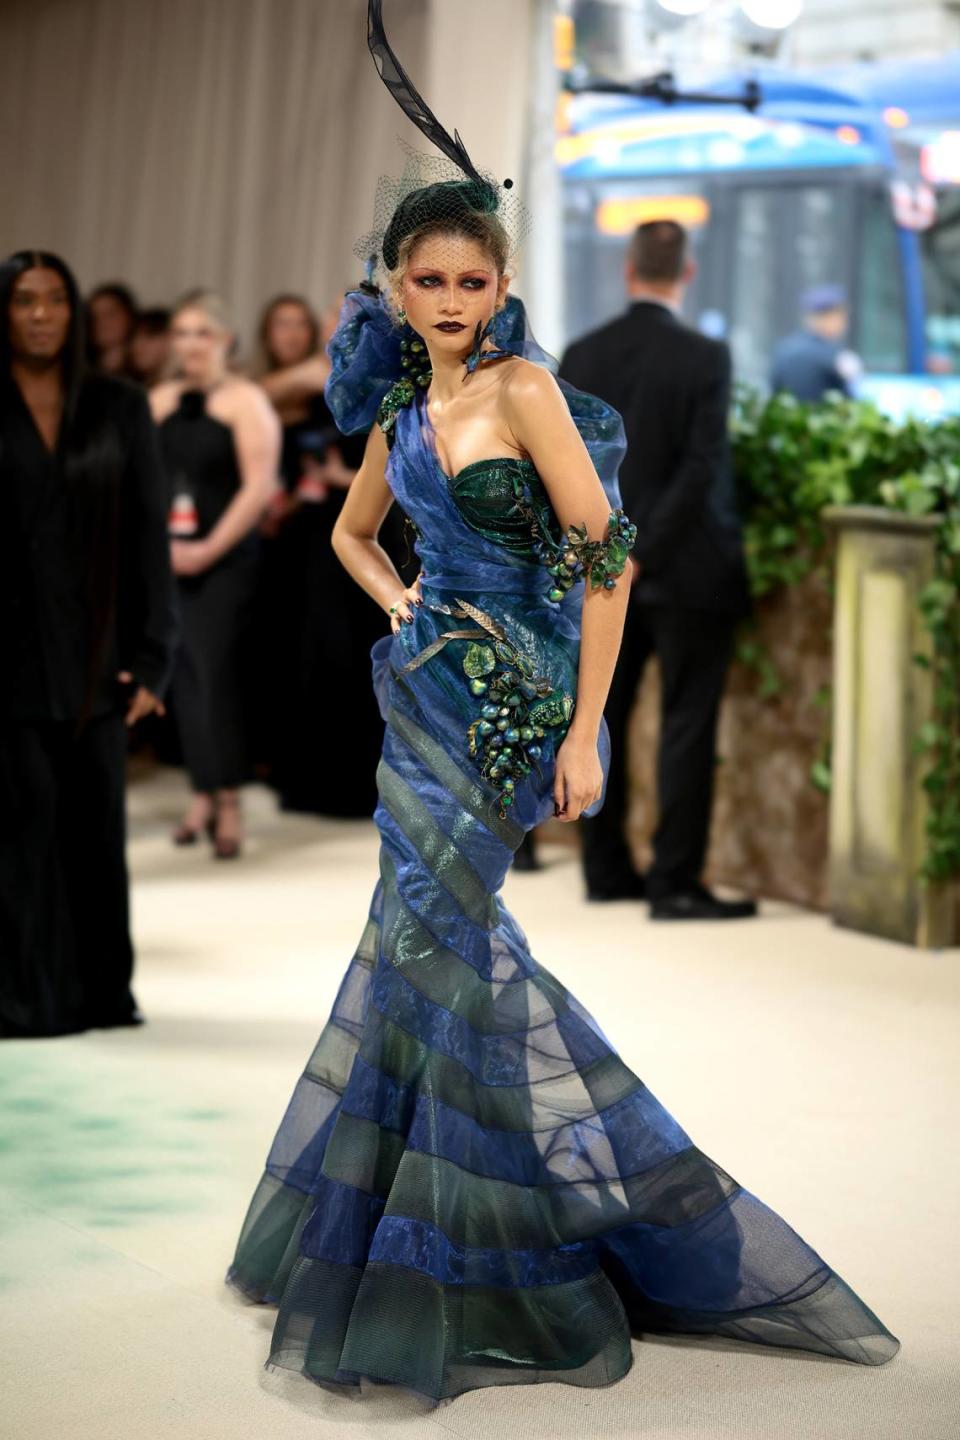 2024 Zendaya was one of the first arrivals in honor of her co-chair duties. The theme was “Sleeping Beauties: Reawakening Fashion” and the dress code was “The Garden of Time.” The Challengers star seemingly took a water approach to the theme as she looked like a wicked mermaid in a multi-layered Maison Margiela by John Galliano dress. Getty